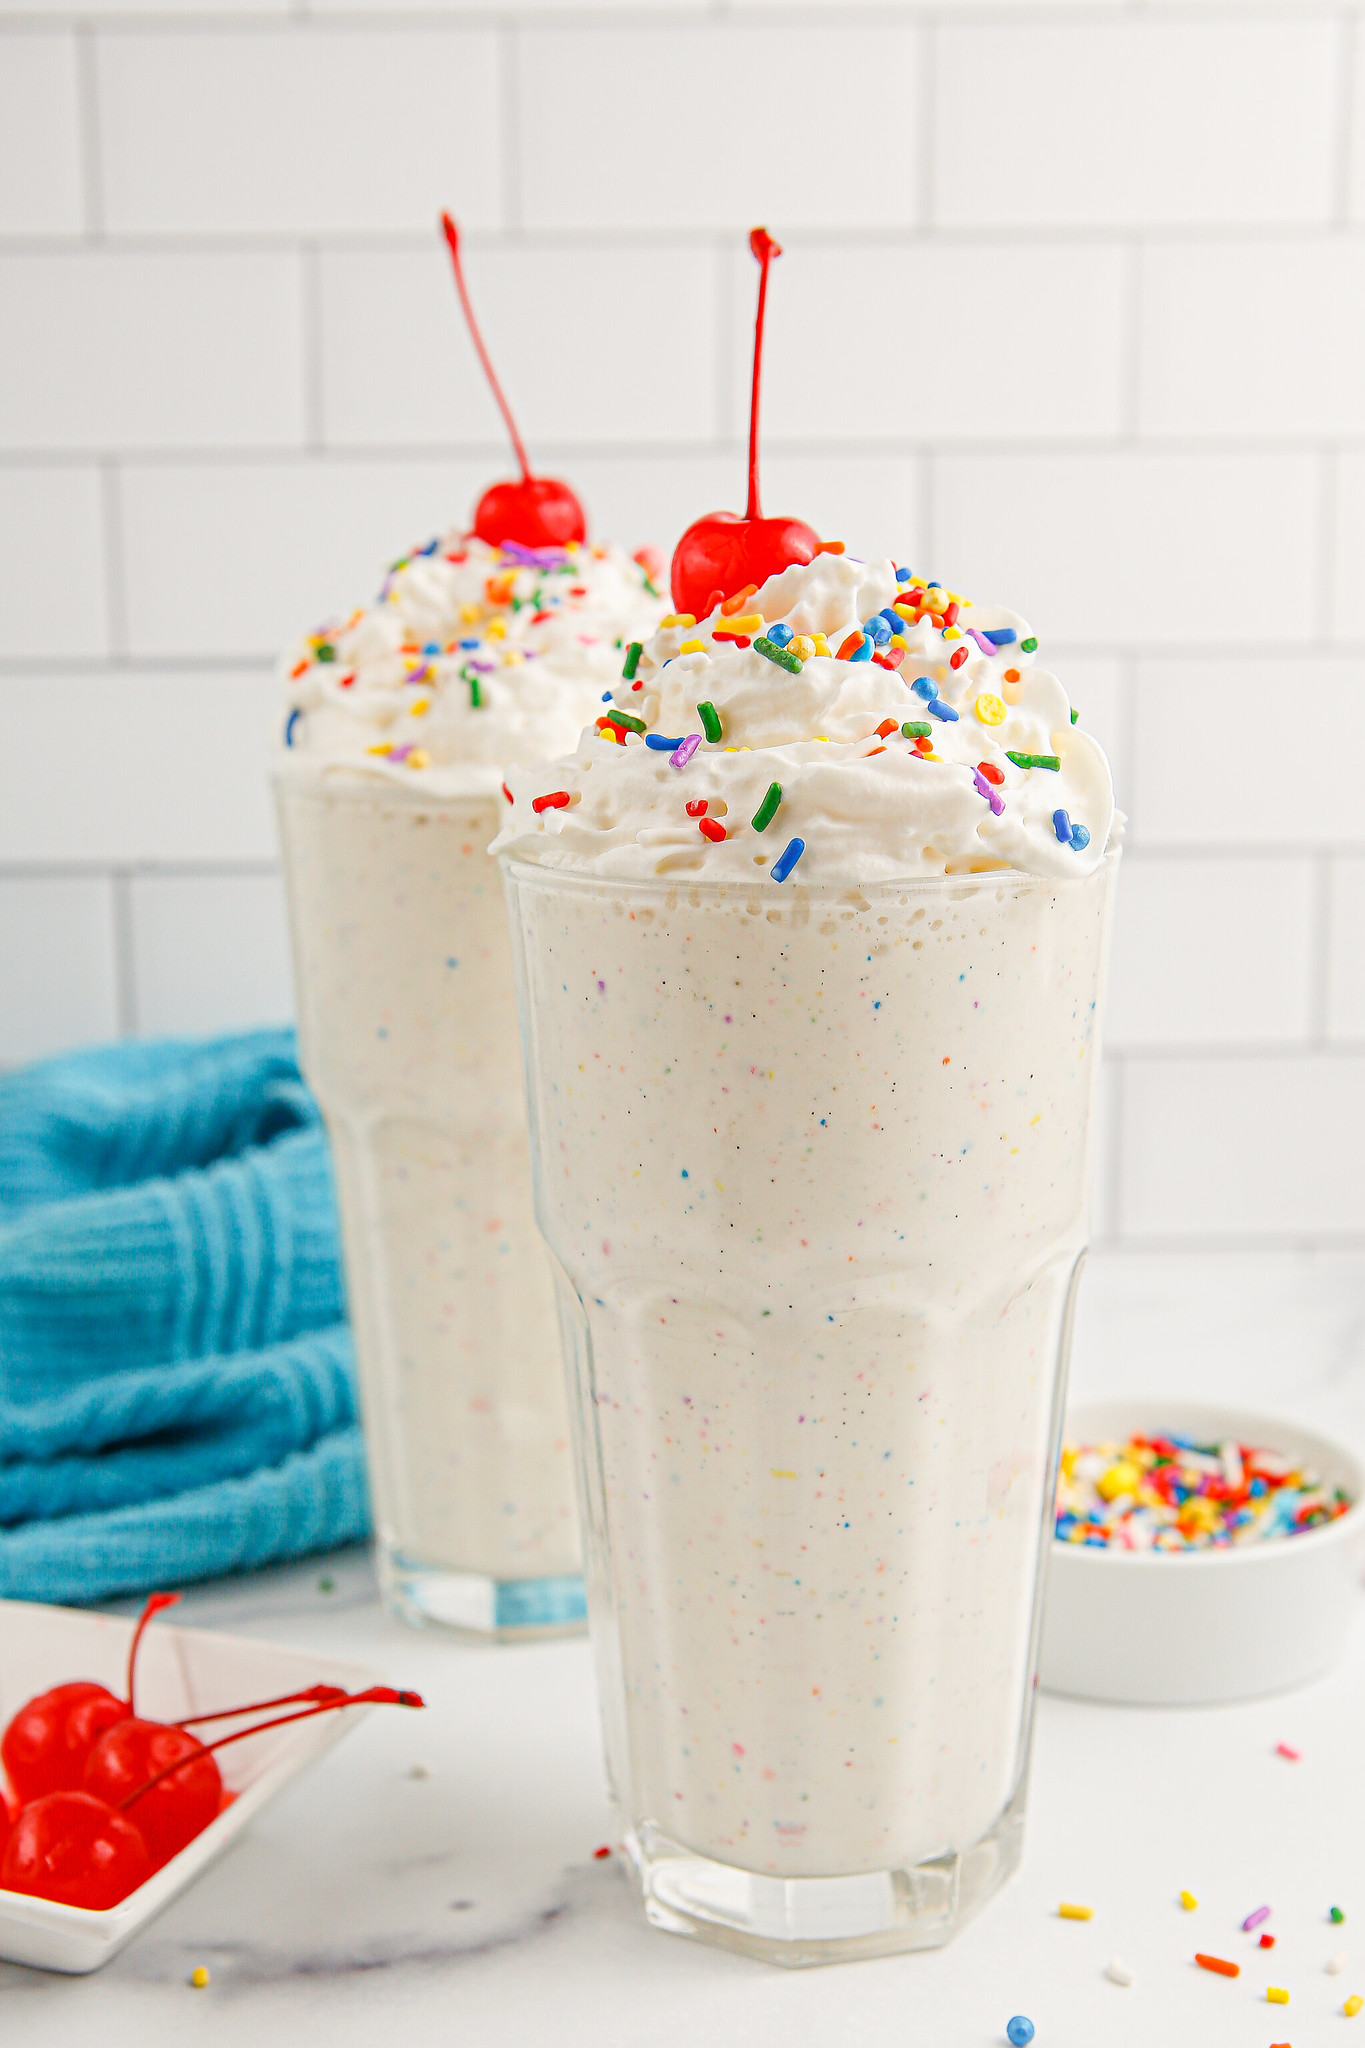 Cake Batter Milkshakes topped with whipped cream, rainbow sprinkles, and a cherry